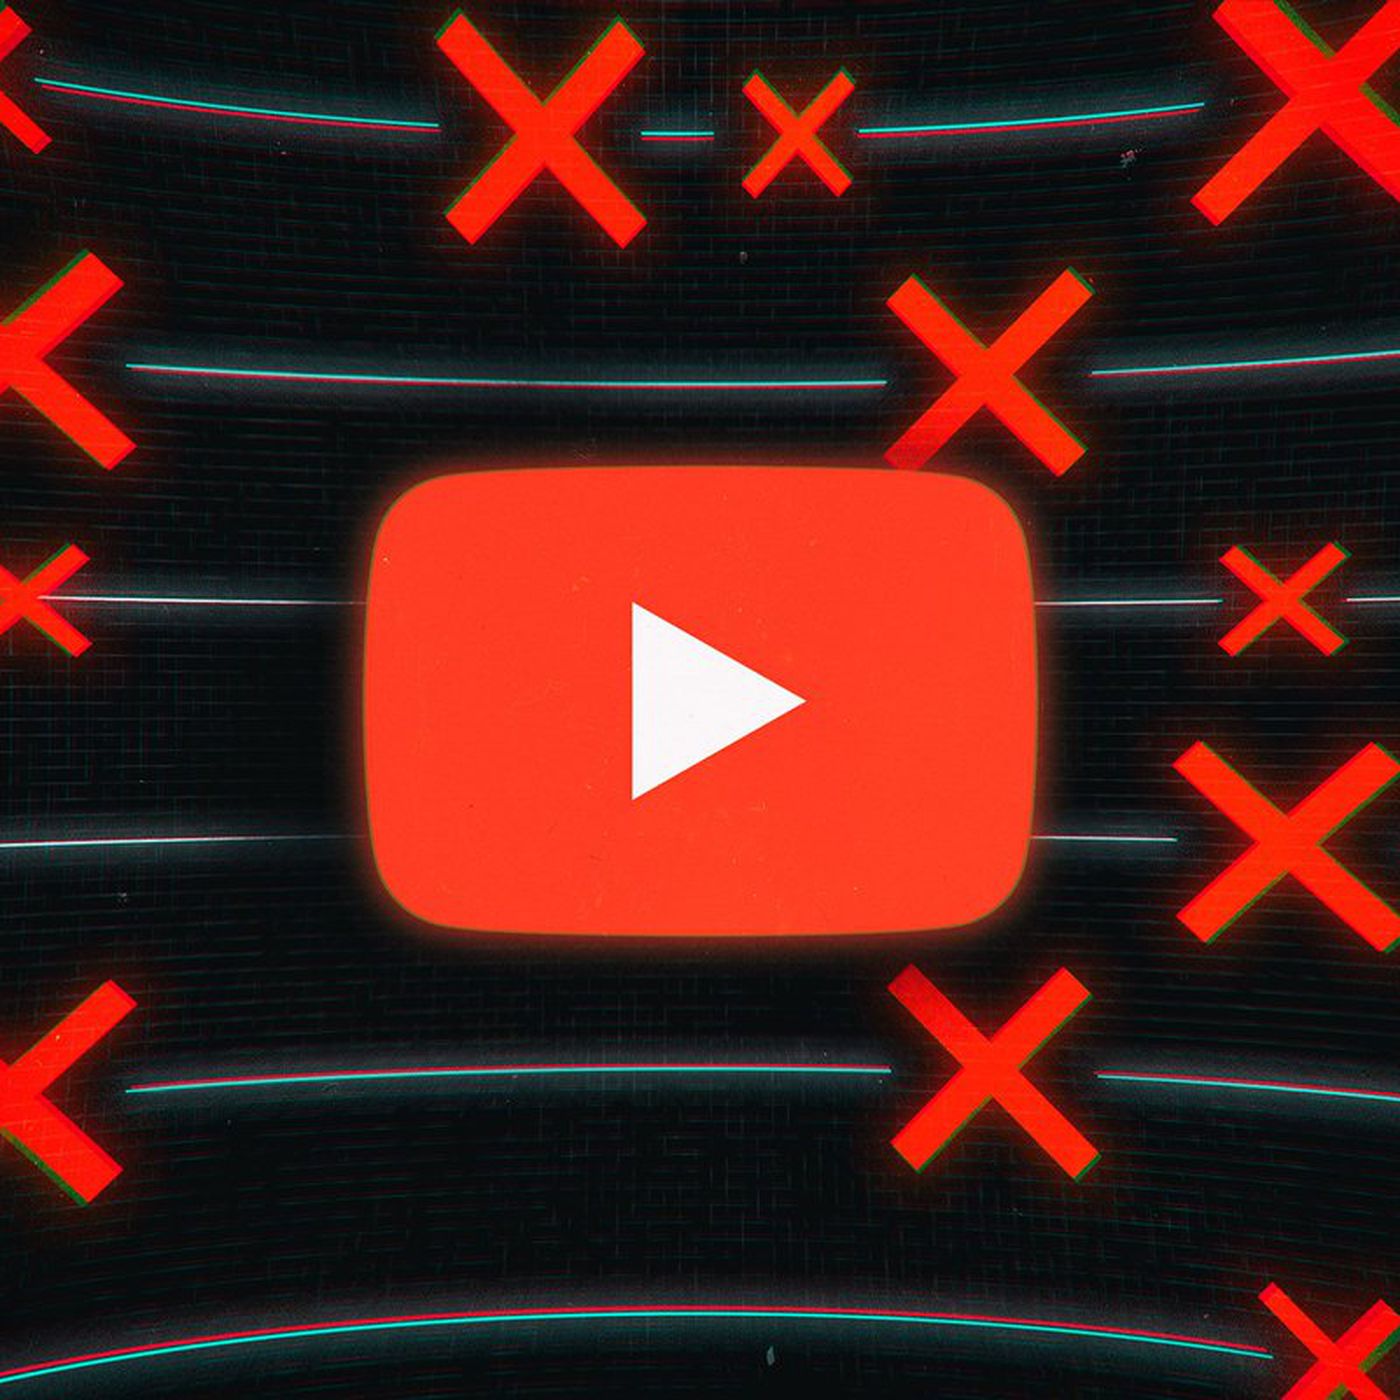 YouTubers say kids' content changes could ruin careers - The Verge